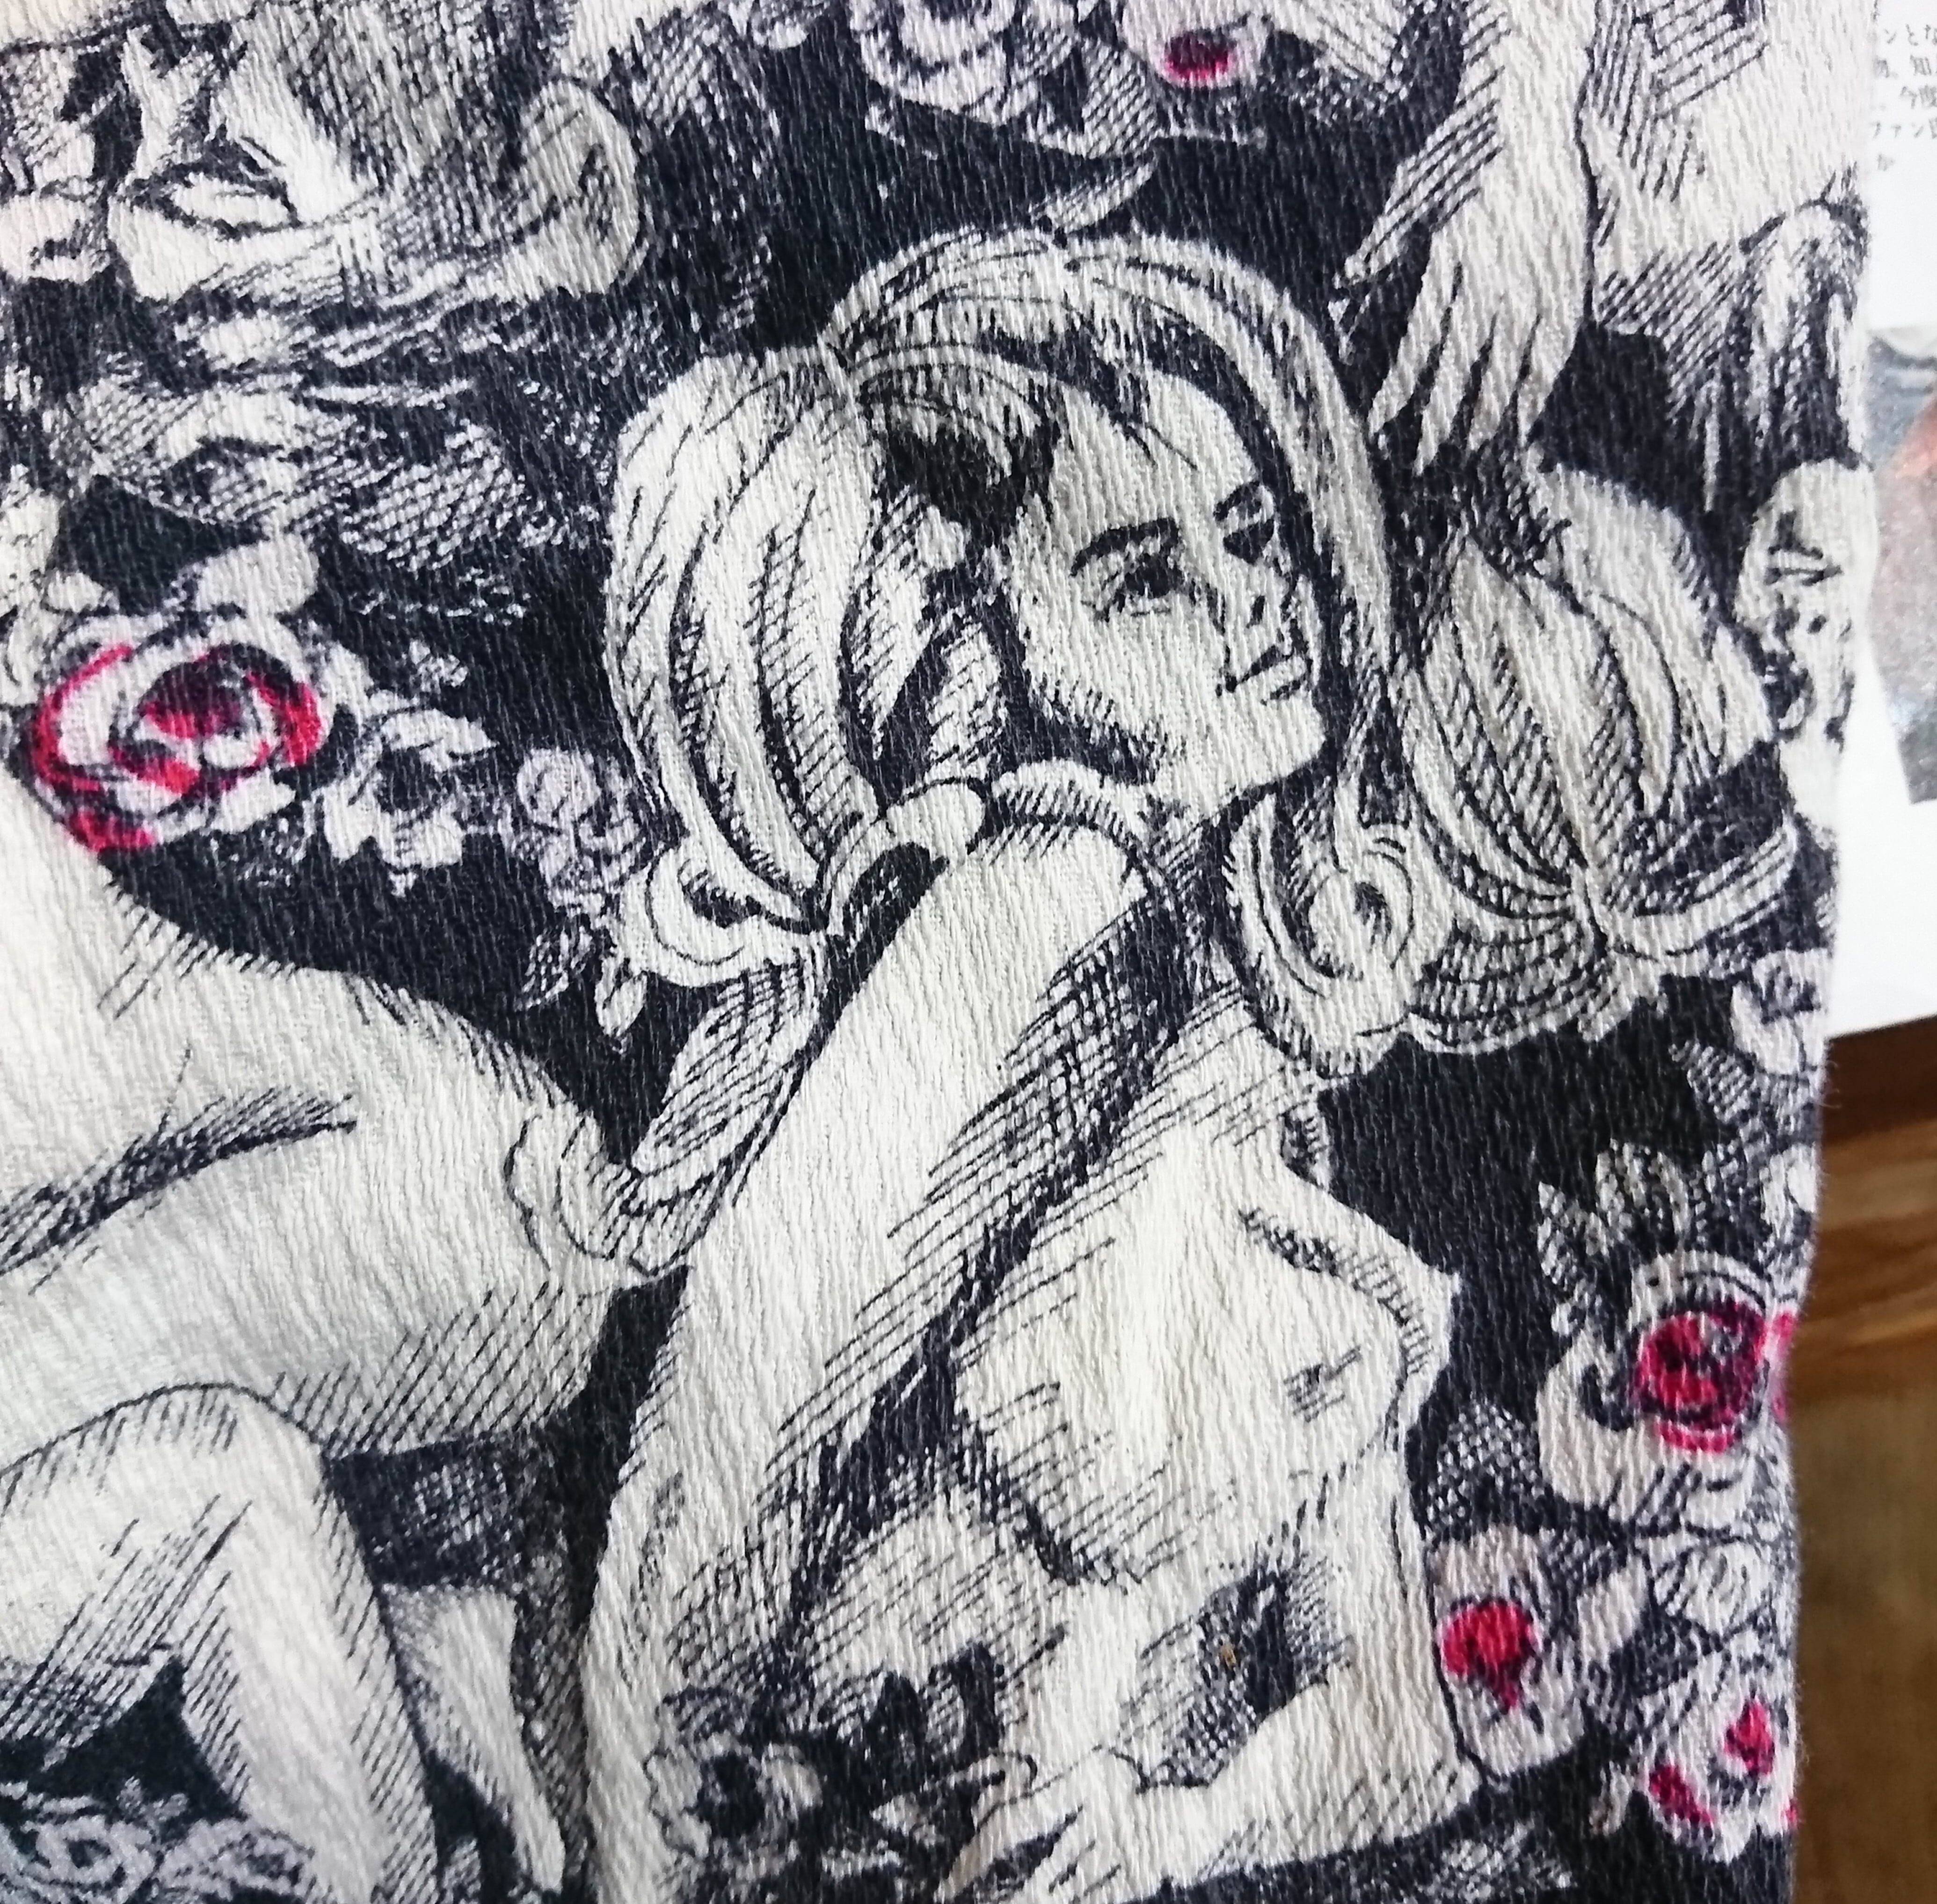 70s vintage nude print shirt ヴィンテージ ヌード 柄 シャツ | 旅 ...